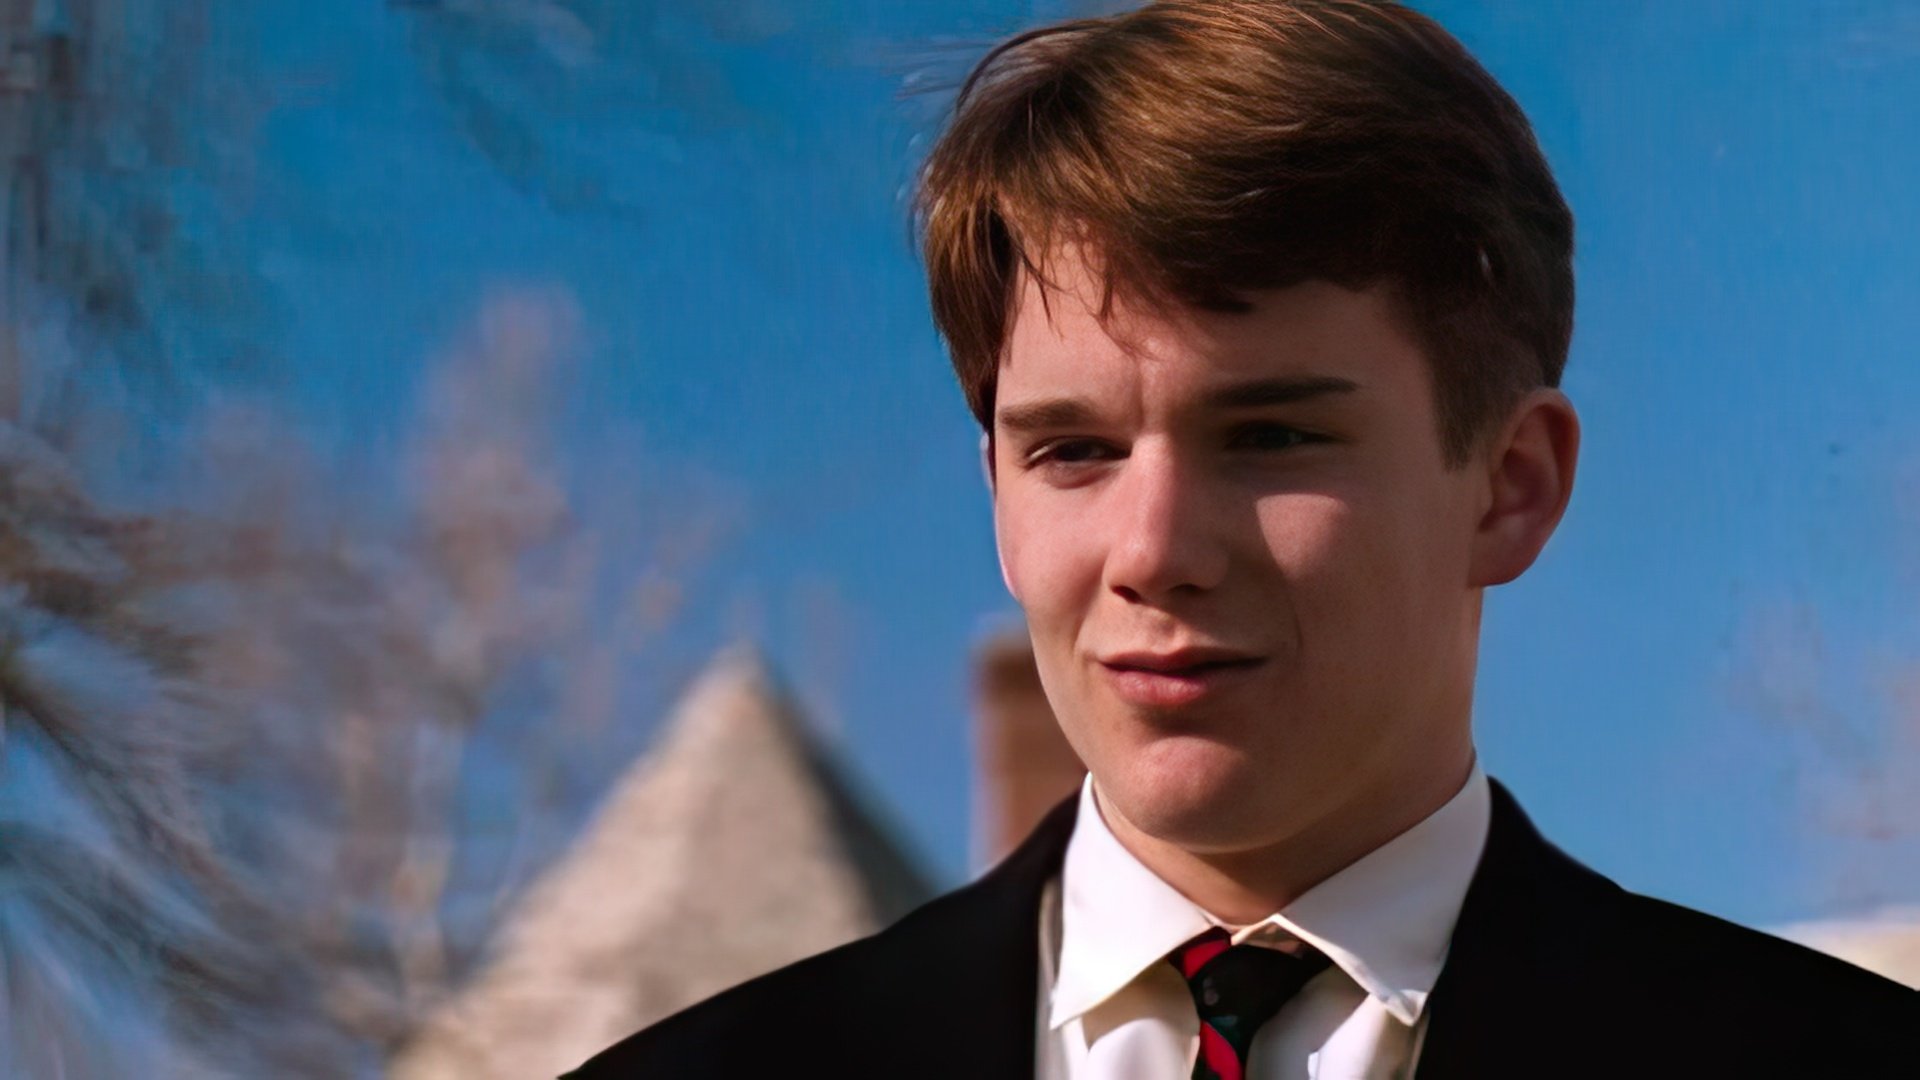 Ethan Hawke became famous for the movie Dead Poets Society